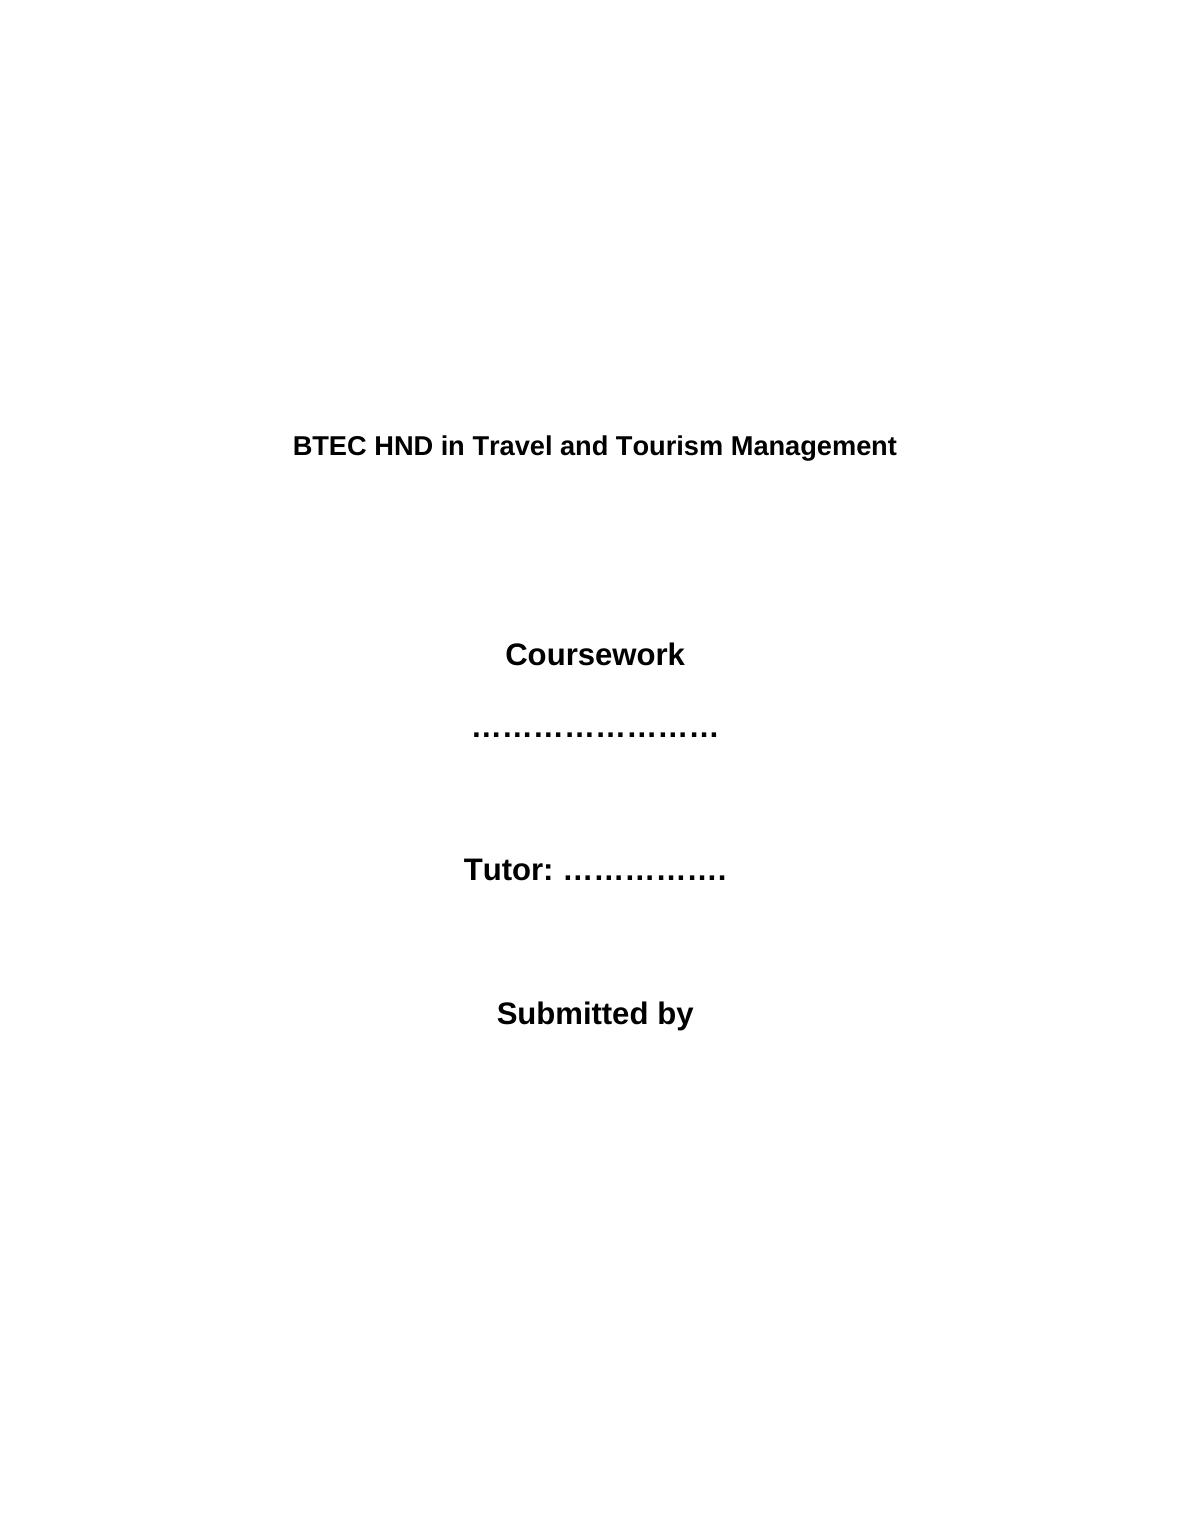 Managing Customer Experience in Travel and Tourism Management Coursework_2